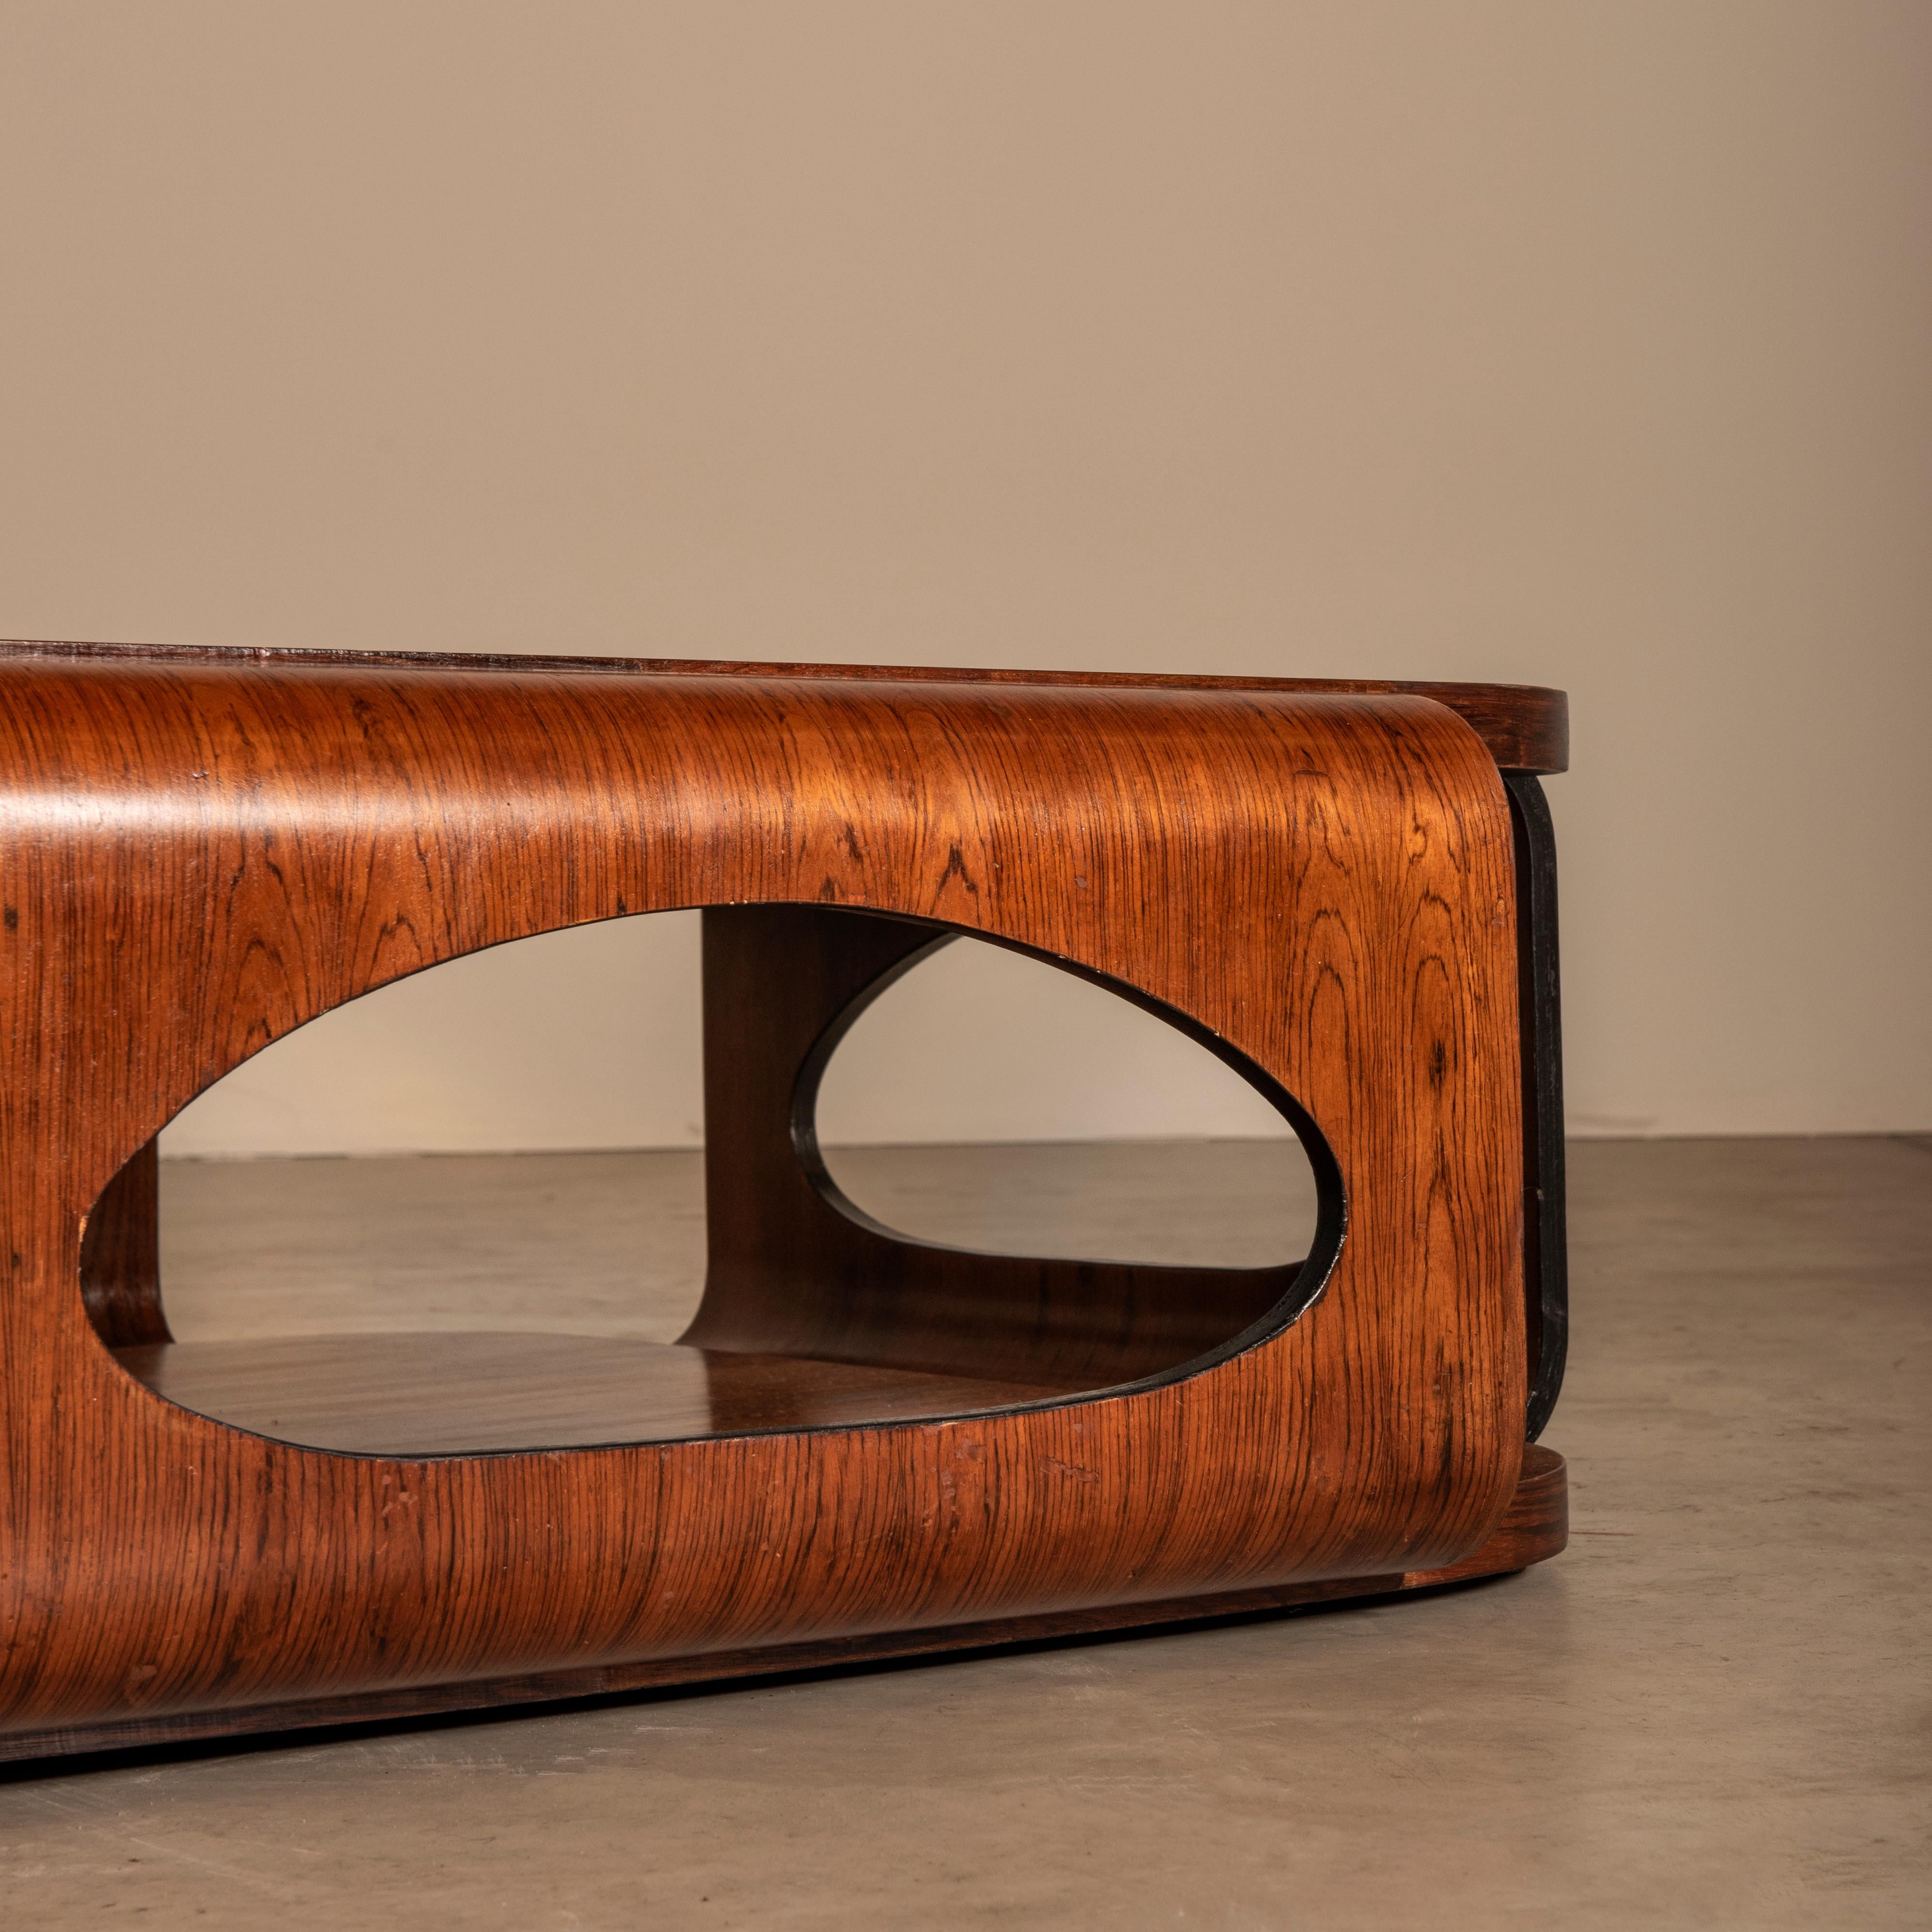 Brazilian Center Table in Wood and Glass, by Móveis Bertomeu, Mid-Century Modern Design For Sale